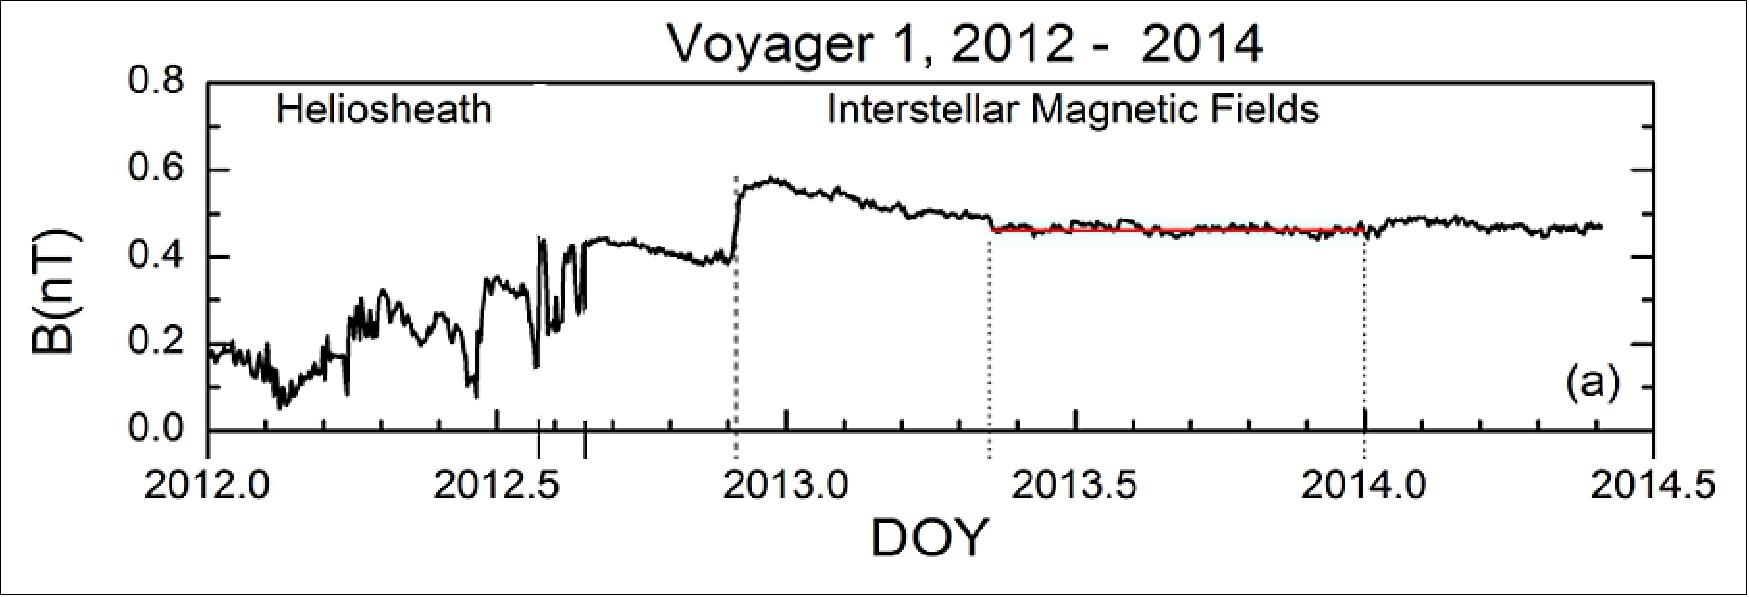 Figure 15: Magnetometer (MAG) data taken from Voyager 1 during its transition into interstellar space in 2012 (image credit: NASA’s Goddard Space Flight Center/Jet Propulsion Laboratory)